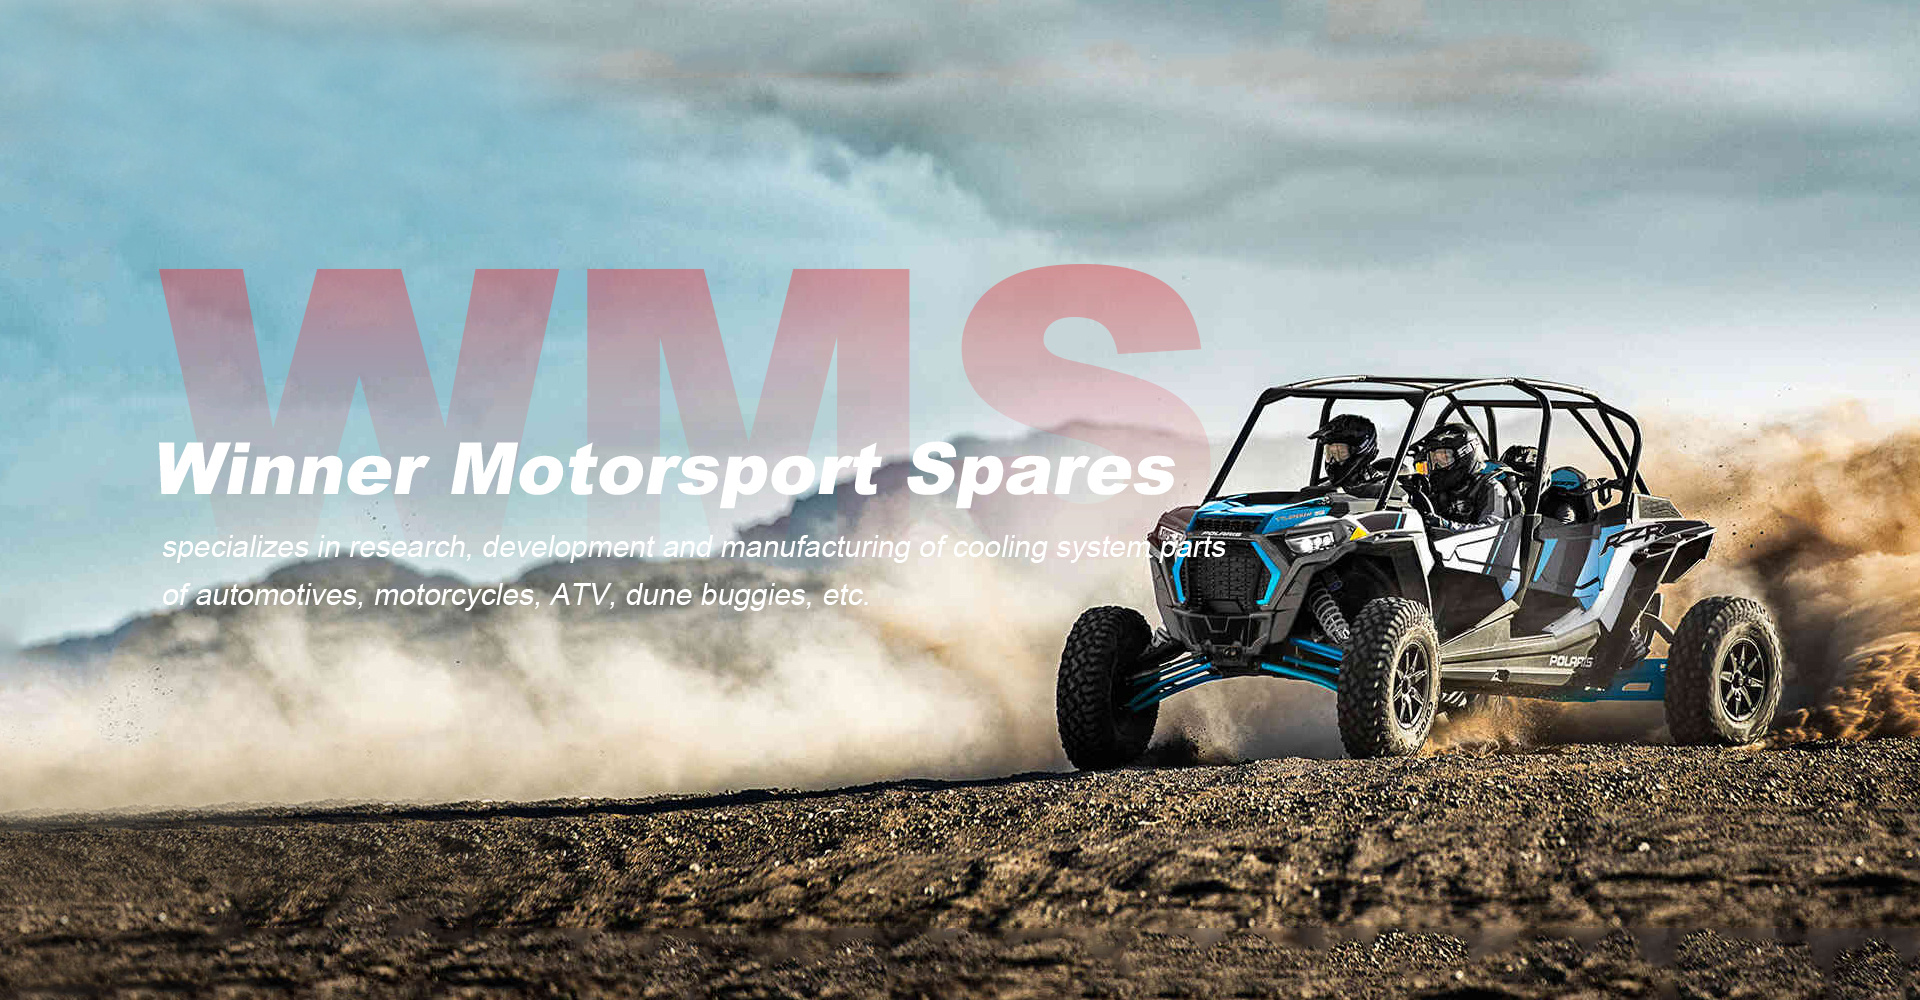 SPECIALIZES IN RESEARCH, DEVELOPMENT AND MANUFACTURING OF COOLING SYSTEM PARTS OF AUTOMOTIVES.MOTORCYCLES ATV, DUNE BUGGIES.ETC.